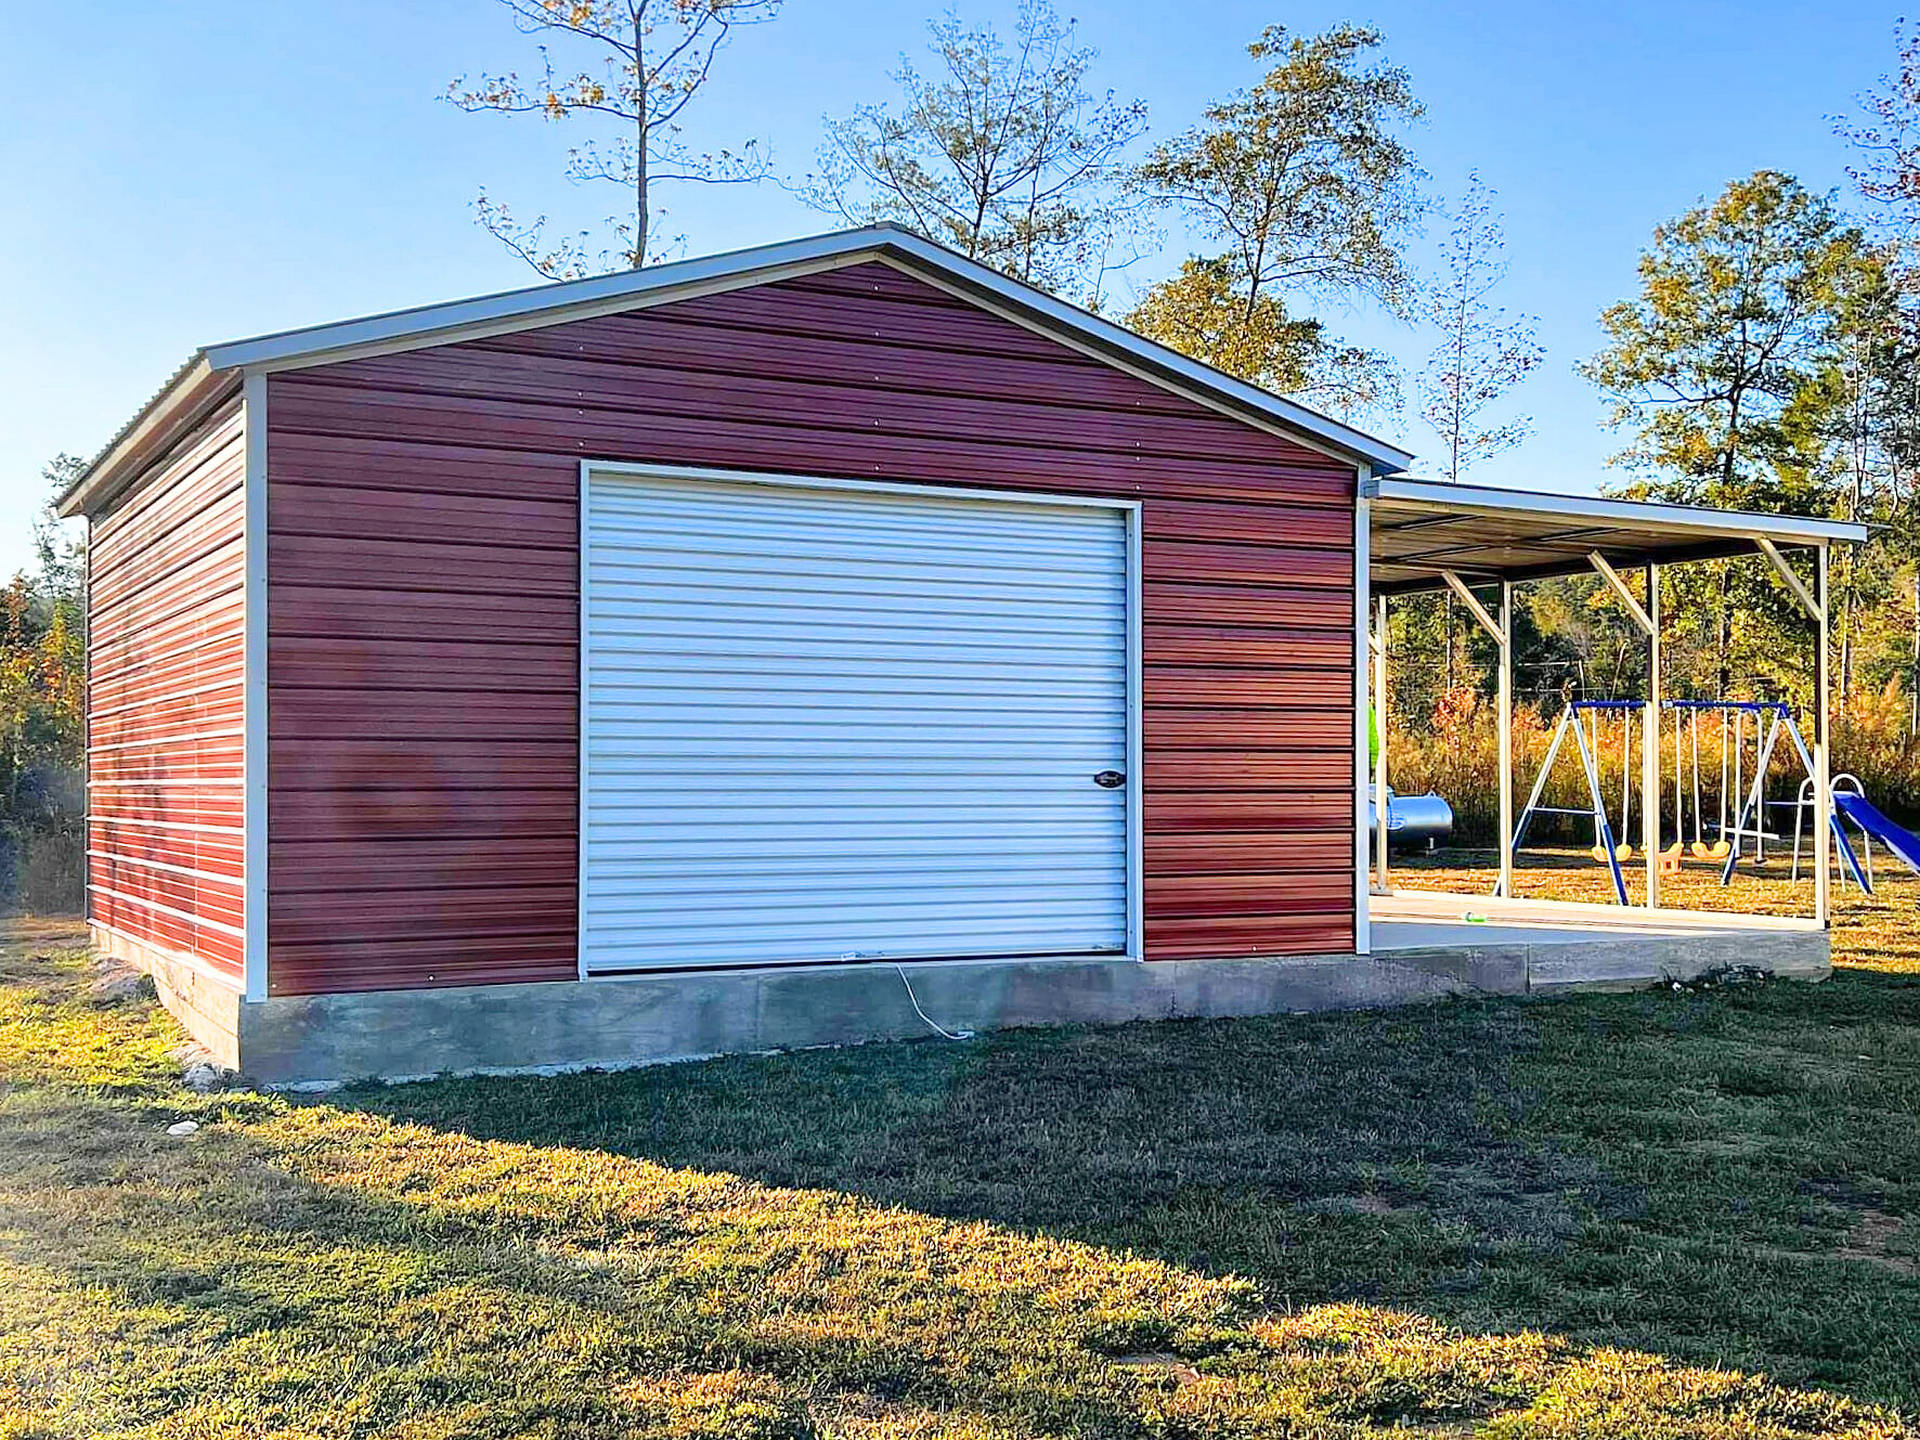 9044 - Single Roll Up Door Garage with Lean To - Custom Structures Direct